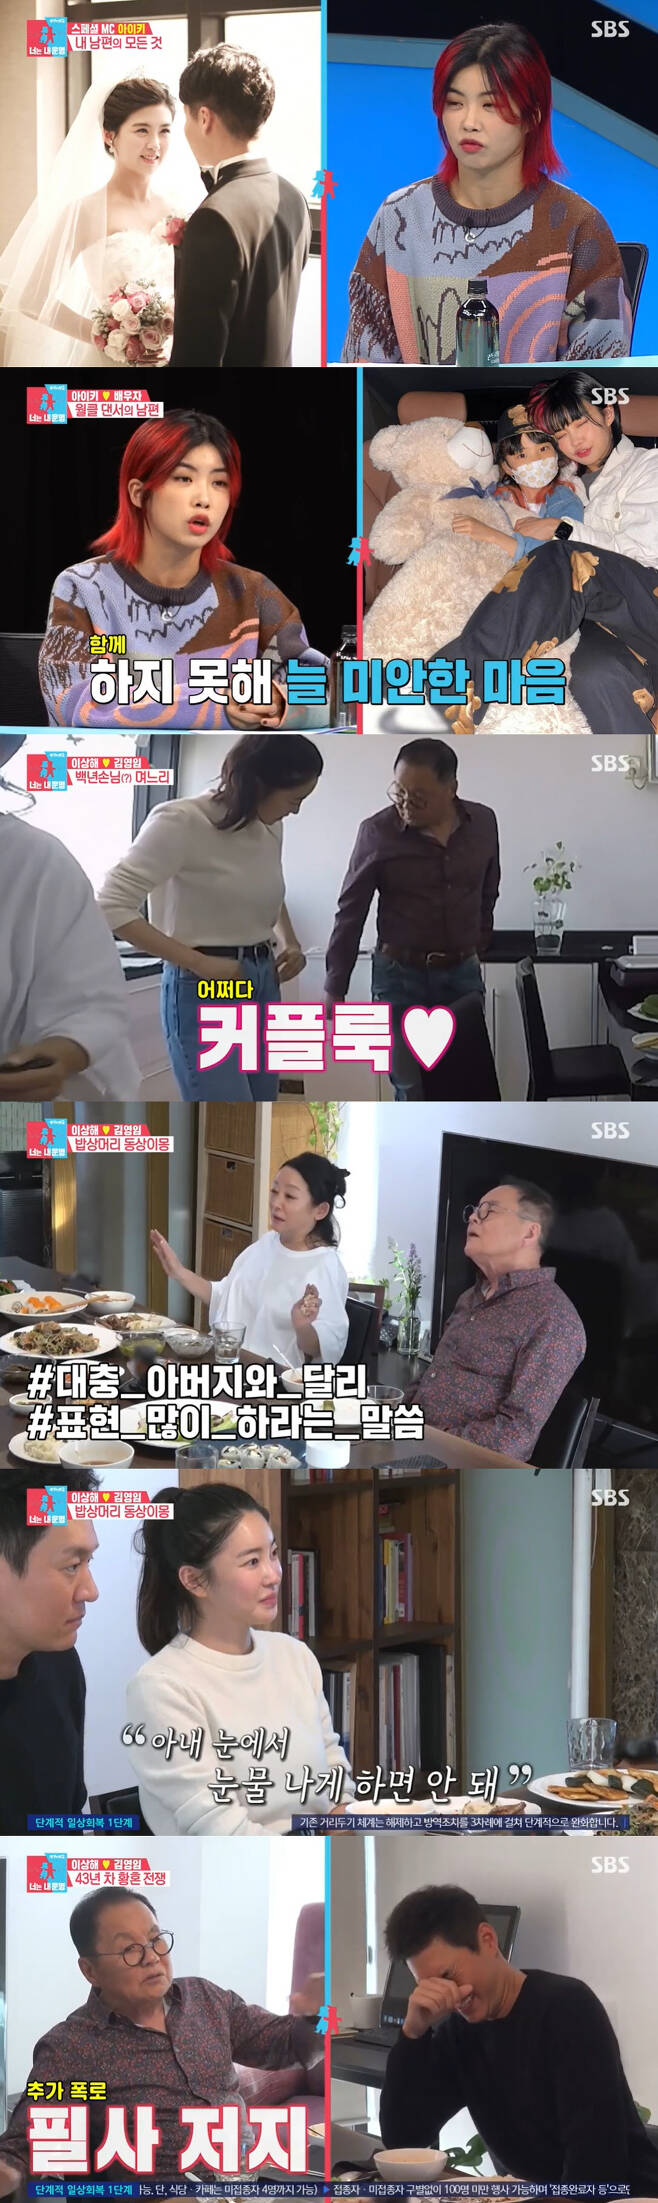 Same Bed, Different Dreams 2: You Are My Dest comedian Lee Sang-hae said he had noticed Daughter-in-law Kim Yoon-ji, son Choi Woo-sungs love affair earlier.On the 22nd, SBS entertainment program Same Bed, Different Dreams 2 Season 2 - You Are My Destiny was broadcast by Lee Yoonji and Choi Woo Sung.iKey, who was on the special MC on the day, said he met Husband at 23 and marriage the following year and played Child Birth at 25.Kim Sook said, I do not disclose Husband. iKey said, I am extroverted, my appearance resembles Joo Jong announcer.Husband is also dedicated to housework, including cleaning and parenting, as well as cooking; iKey said, The childrens schoolboy Husband cares.I had a lot of overseas performances before Corona, and Husband took part in parenting leave or annual leave. Every time I went away for a long time, my child was sick. I am sorry for the child because I am sick recently.Kim Yoon-ji cooked with Husband Choi Woo-sung and walked away with it to go to his in-laws, which is five minutes away.iKey also said that his in-laws are five minutes away, It is difficult because of the schedule these days, but once I went to dinner almost every day.At first, I was worried that those who did not marriage around were uncomfortable, but I was so comfortable.Rather, he asks me when I rest to leave my child to me. Kim Yoon-ji showed a lovely aspect after arriving at his in-laws, holding his father-in-law and saying a charming word.My father wears so nice today, he said.In addition, Kim Young-im and Lee Sang-hae said, I think you should come out in Same Bed, Different Dreams 2.I was nervous and bumped into this house every day, and then Yoonji showed up and became a vital part of me, Sang-hae said. Thank you. I thought it would be a big deal to clean the dishes or clean the dishes.One day I washed the dishes and my back hurt. I felt that the women were hard, but I was over 60 years old. I would have been nice if I knew early. Kim Yoon-ji said, Why am I crying? Its the first time my father has said this. Kim Young-im also poured tears along and told Son, You really have to be good to Yunji.You shouldnt let her eyes tear.It has been 43 years since I married, and (I wonder) I have never remembered my birthday or marriage anniversary. Strange confessed that he had noticed Kim Yoon-ji and Choi Woo-sungs Lost Couples early on. Yoon Ji often came and went to (son) house.The guard said, The girls here. I hid in the guard room. Im stupid. I knew her.Yes (Yoonji) My father and I know each other, but do you come in and out late at night without talking to (adults)? At night! and laughed.Lee Ji-hoon Family first met Ayas parents, and although they had reported their marriage earlier, they had never met either side of the family because of Corona.Lee Ji-hoon said to his father-in-law and mother-in-law, I was expecting you, I wanted to meet you. He then said, I am six years old different from my mother-in-law.Im 14 years old with my father-in-law, and after she laughed, she said,  (Lee Ji-hoon) looks young, so its okay.Its no stranger to me from the video last time, you come here often now, said Lee Ji-hoon, a mother who said, We were relieved to have your daughter pretty.I would like to ask you well, even if it is not enough in many ways. Lee Ji-hoon said, I made it when my father said that. 